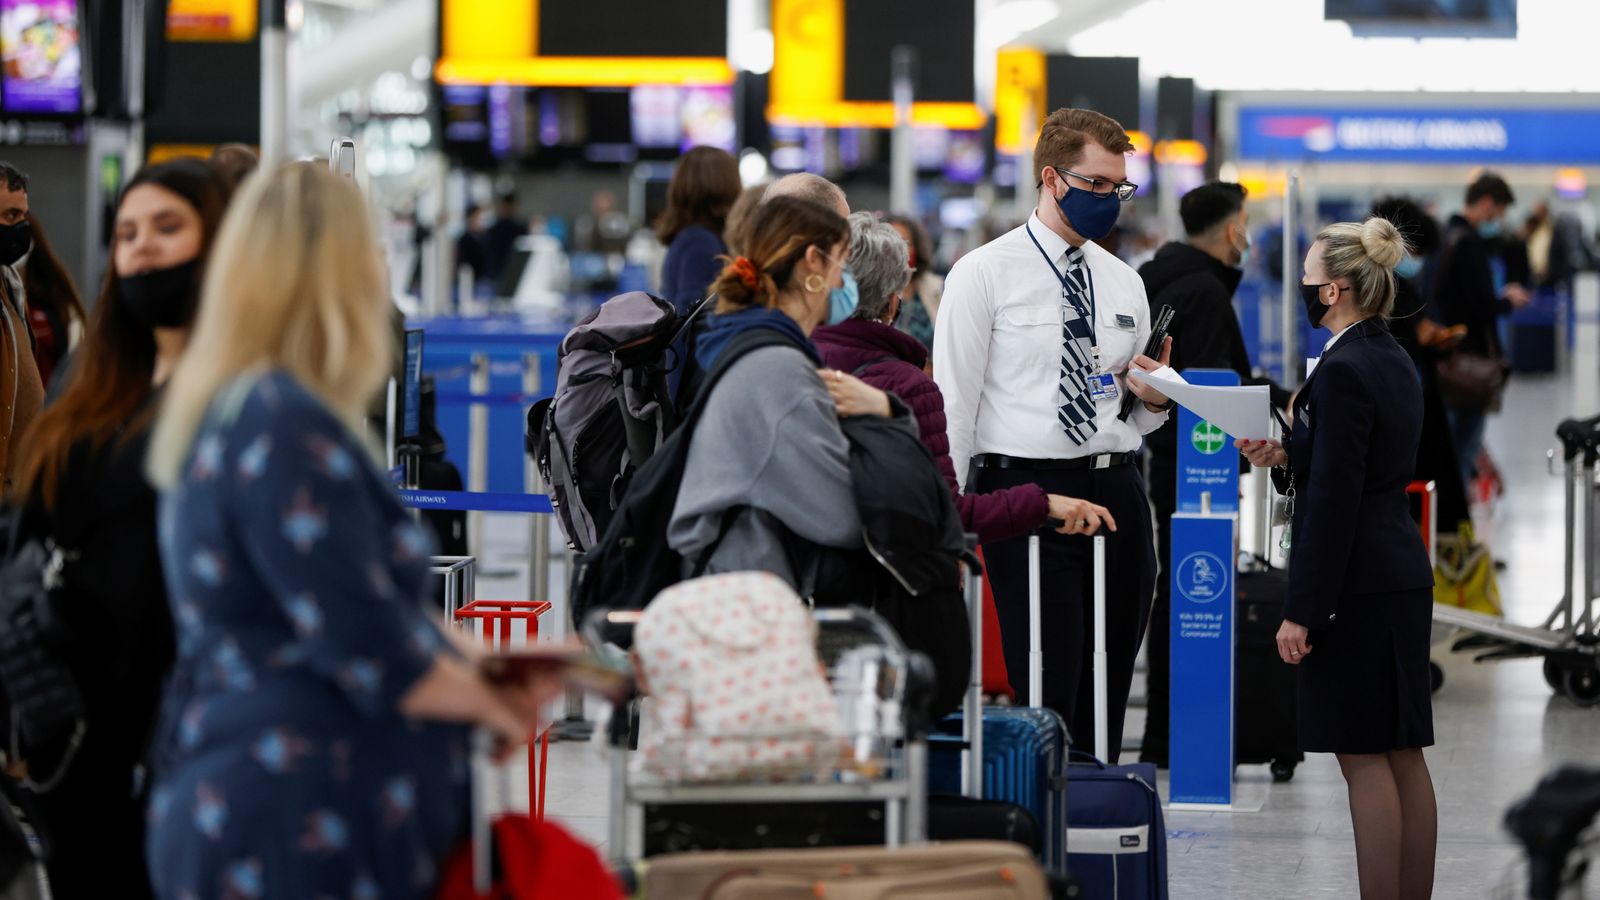 Passengers queue for check-in desks in the departures area of Terminal 5 at Heathrow Airport in London